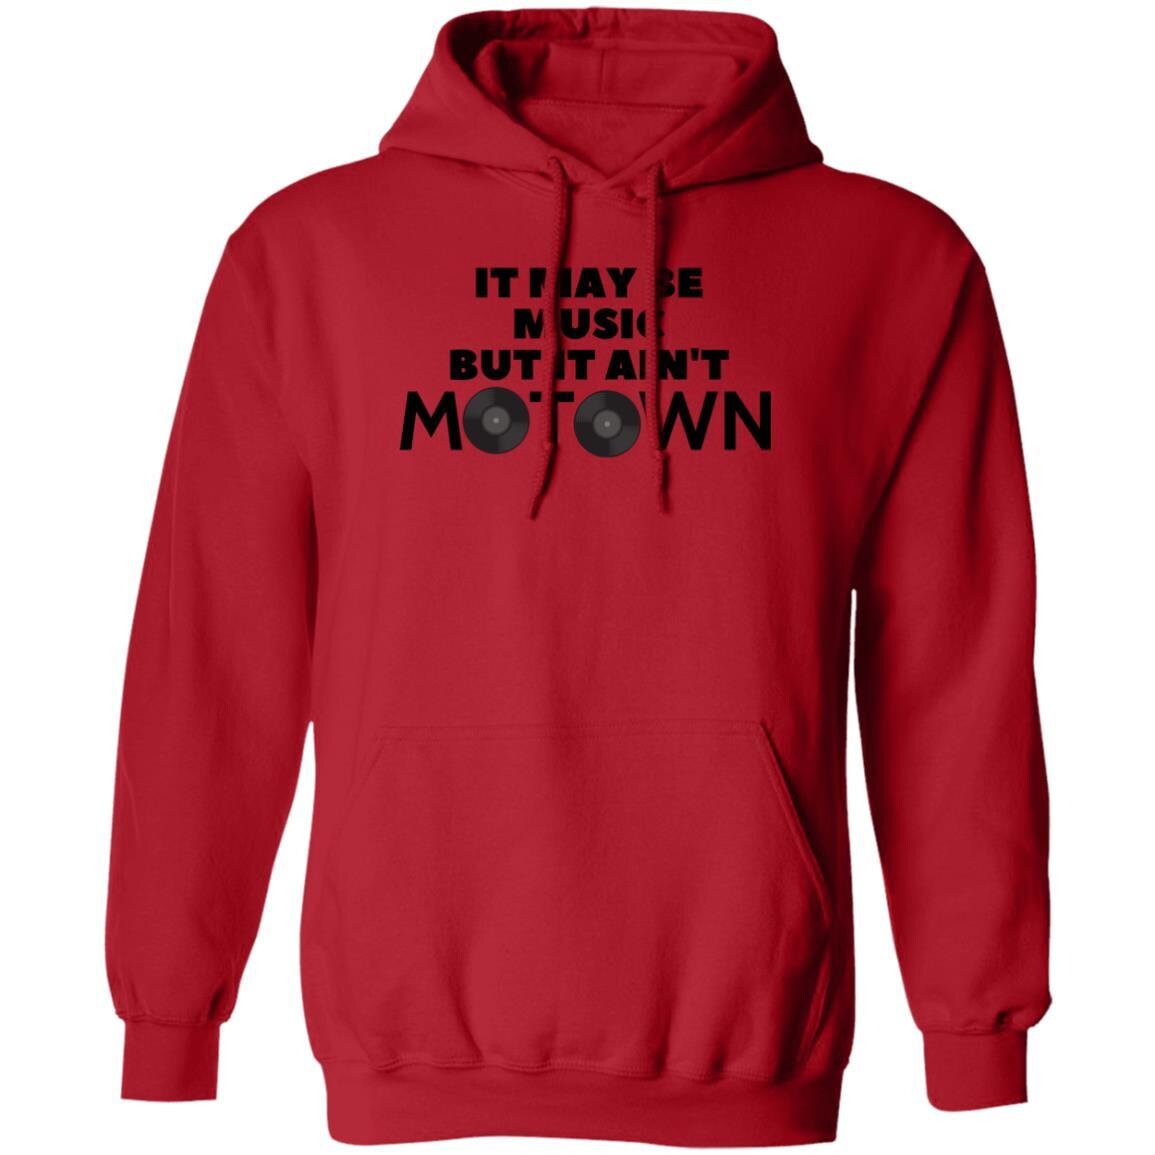 It May Be Music But It Ain't Motown Hoodie